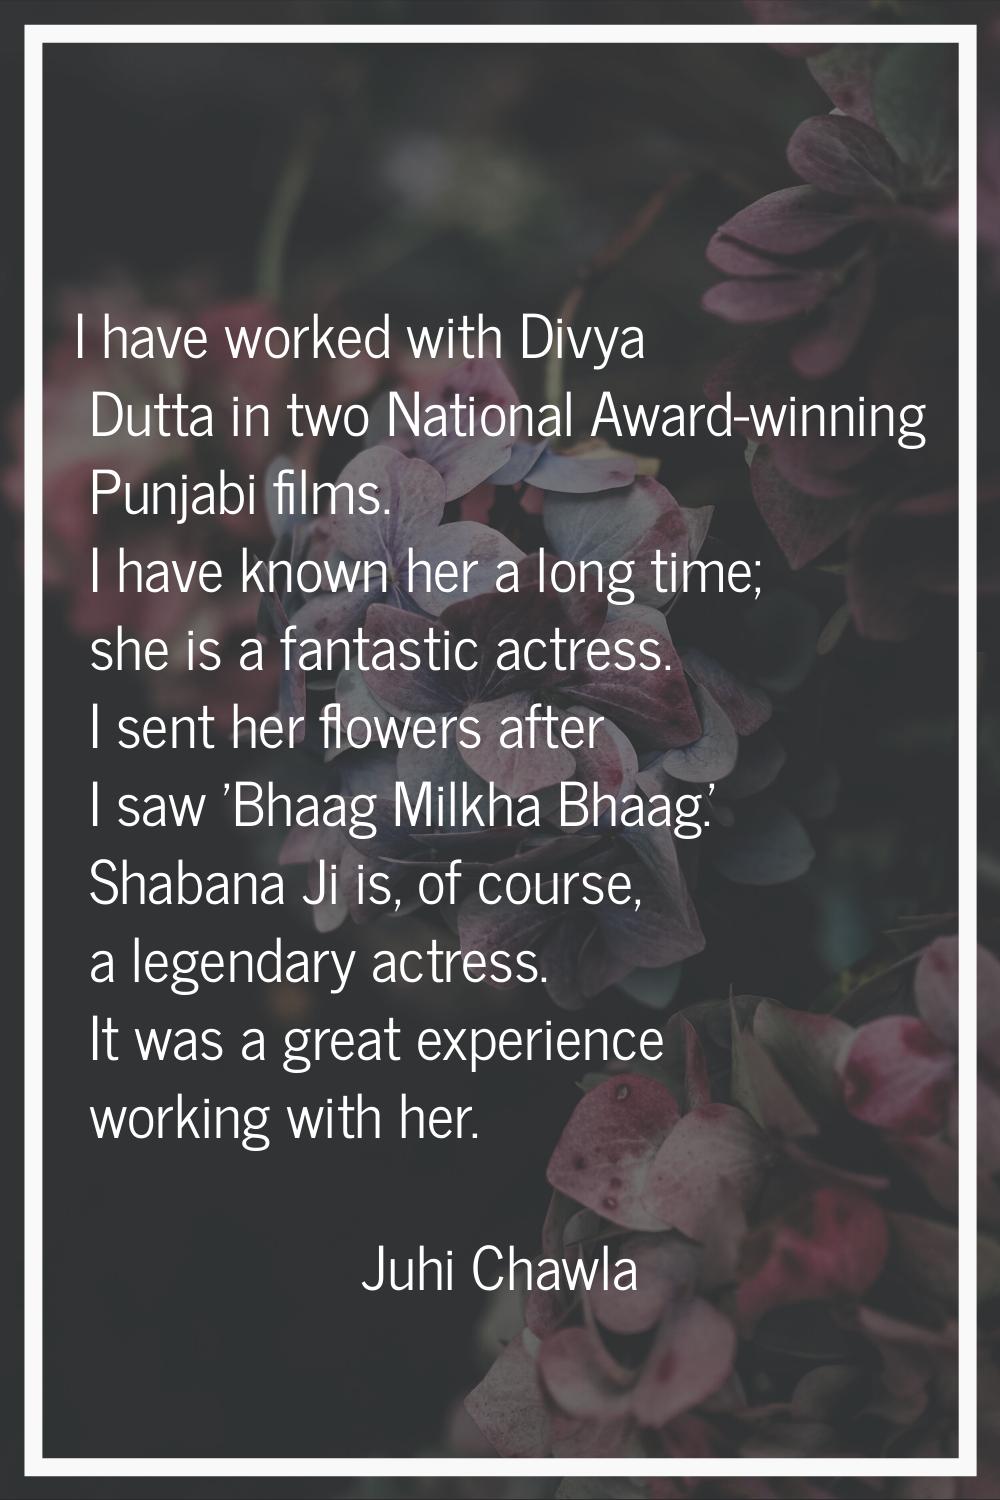 I have worked with Divya Dutta in two National Award-winning Punjabi films. I have known her a long